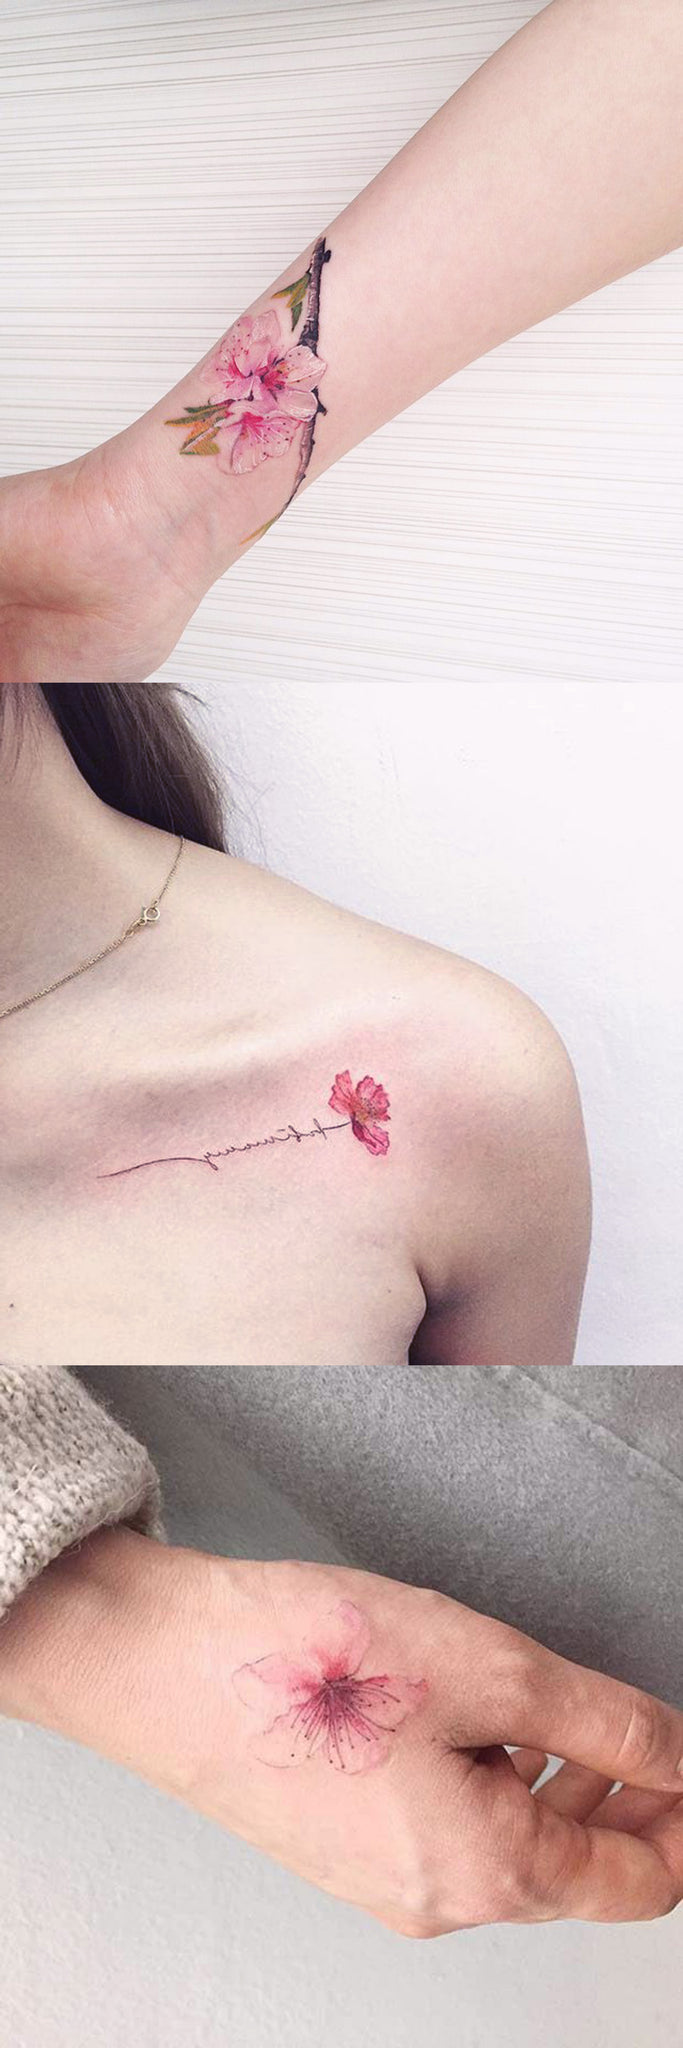 24 Cool Tattoo Ideas for Every Part of Your Arm